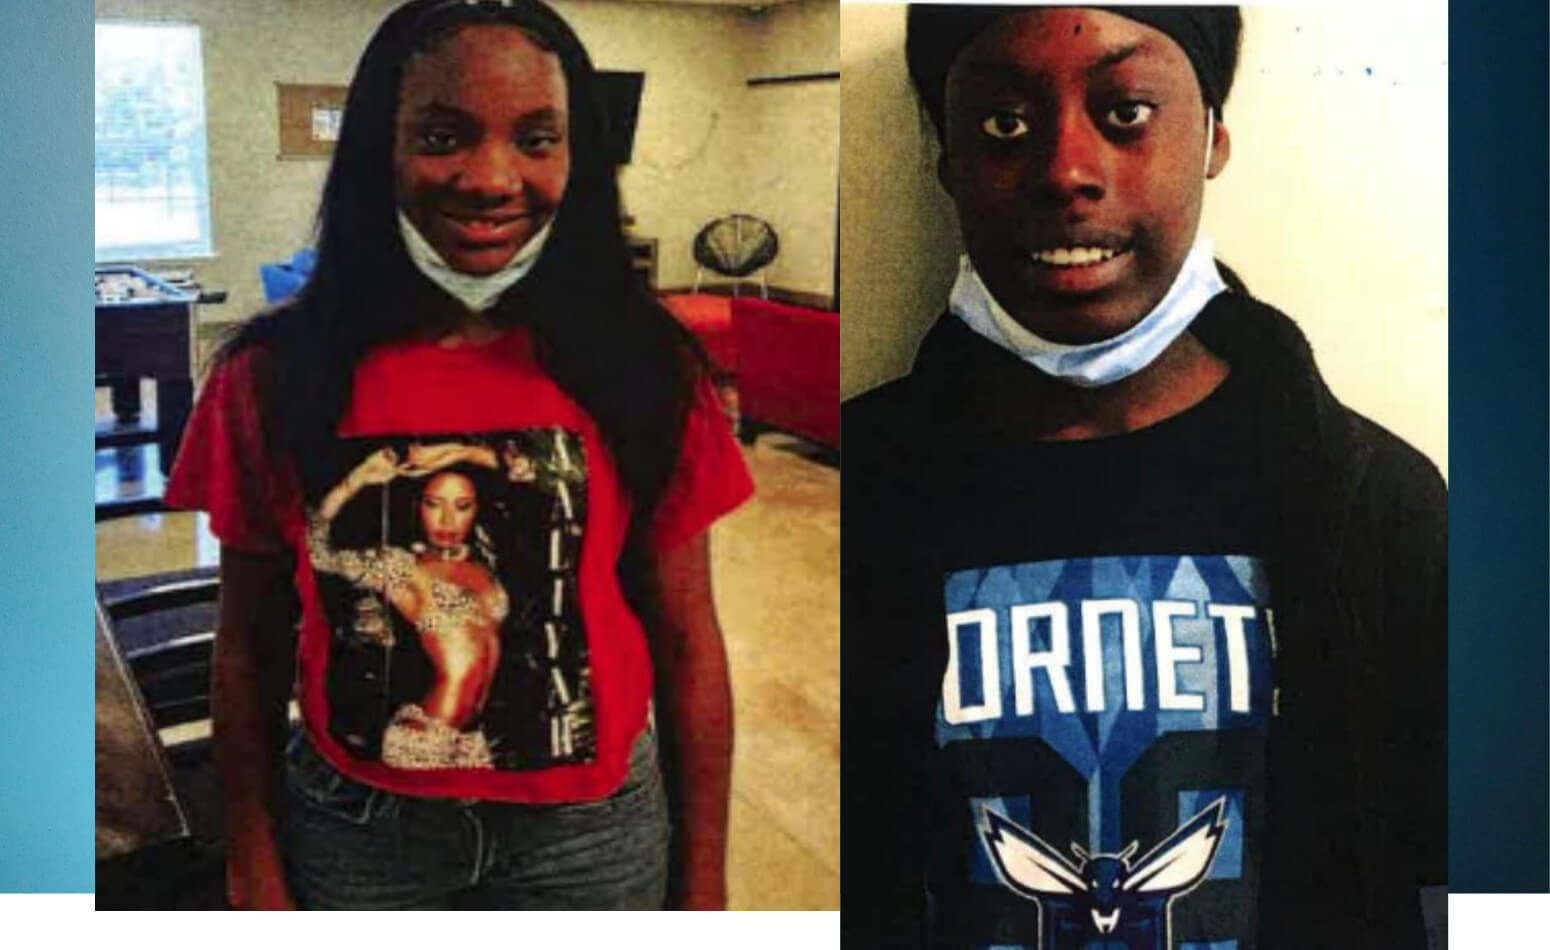 Pair of Mississippi teens reported as missing from Children's Home